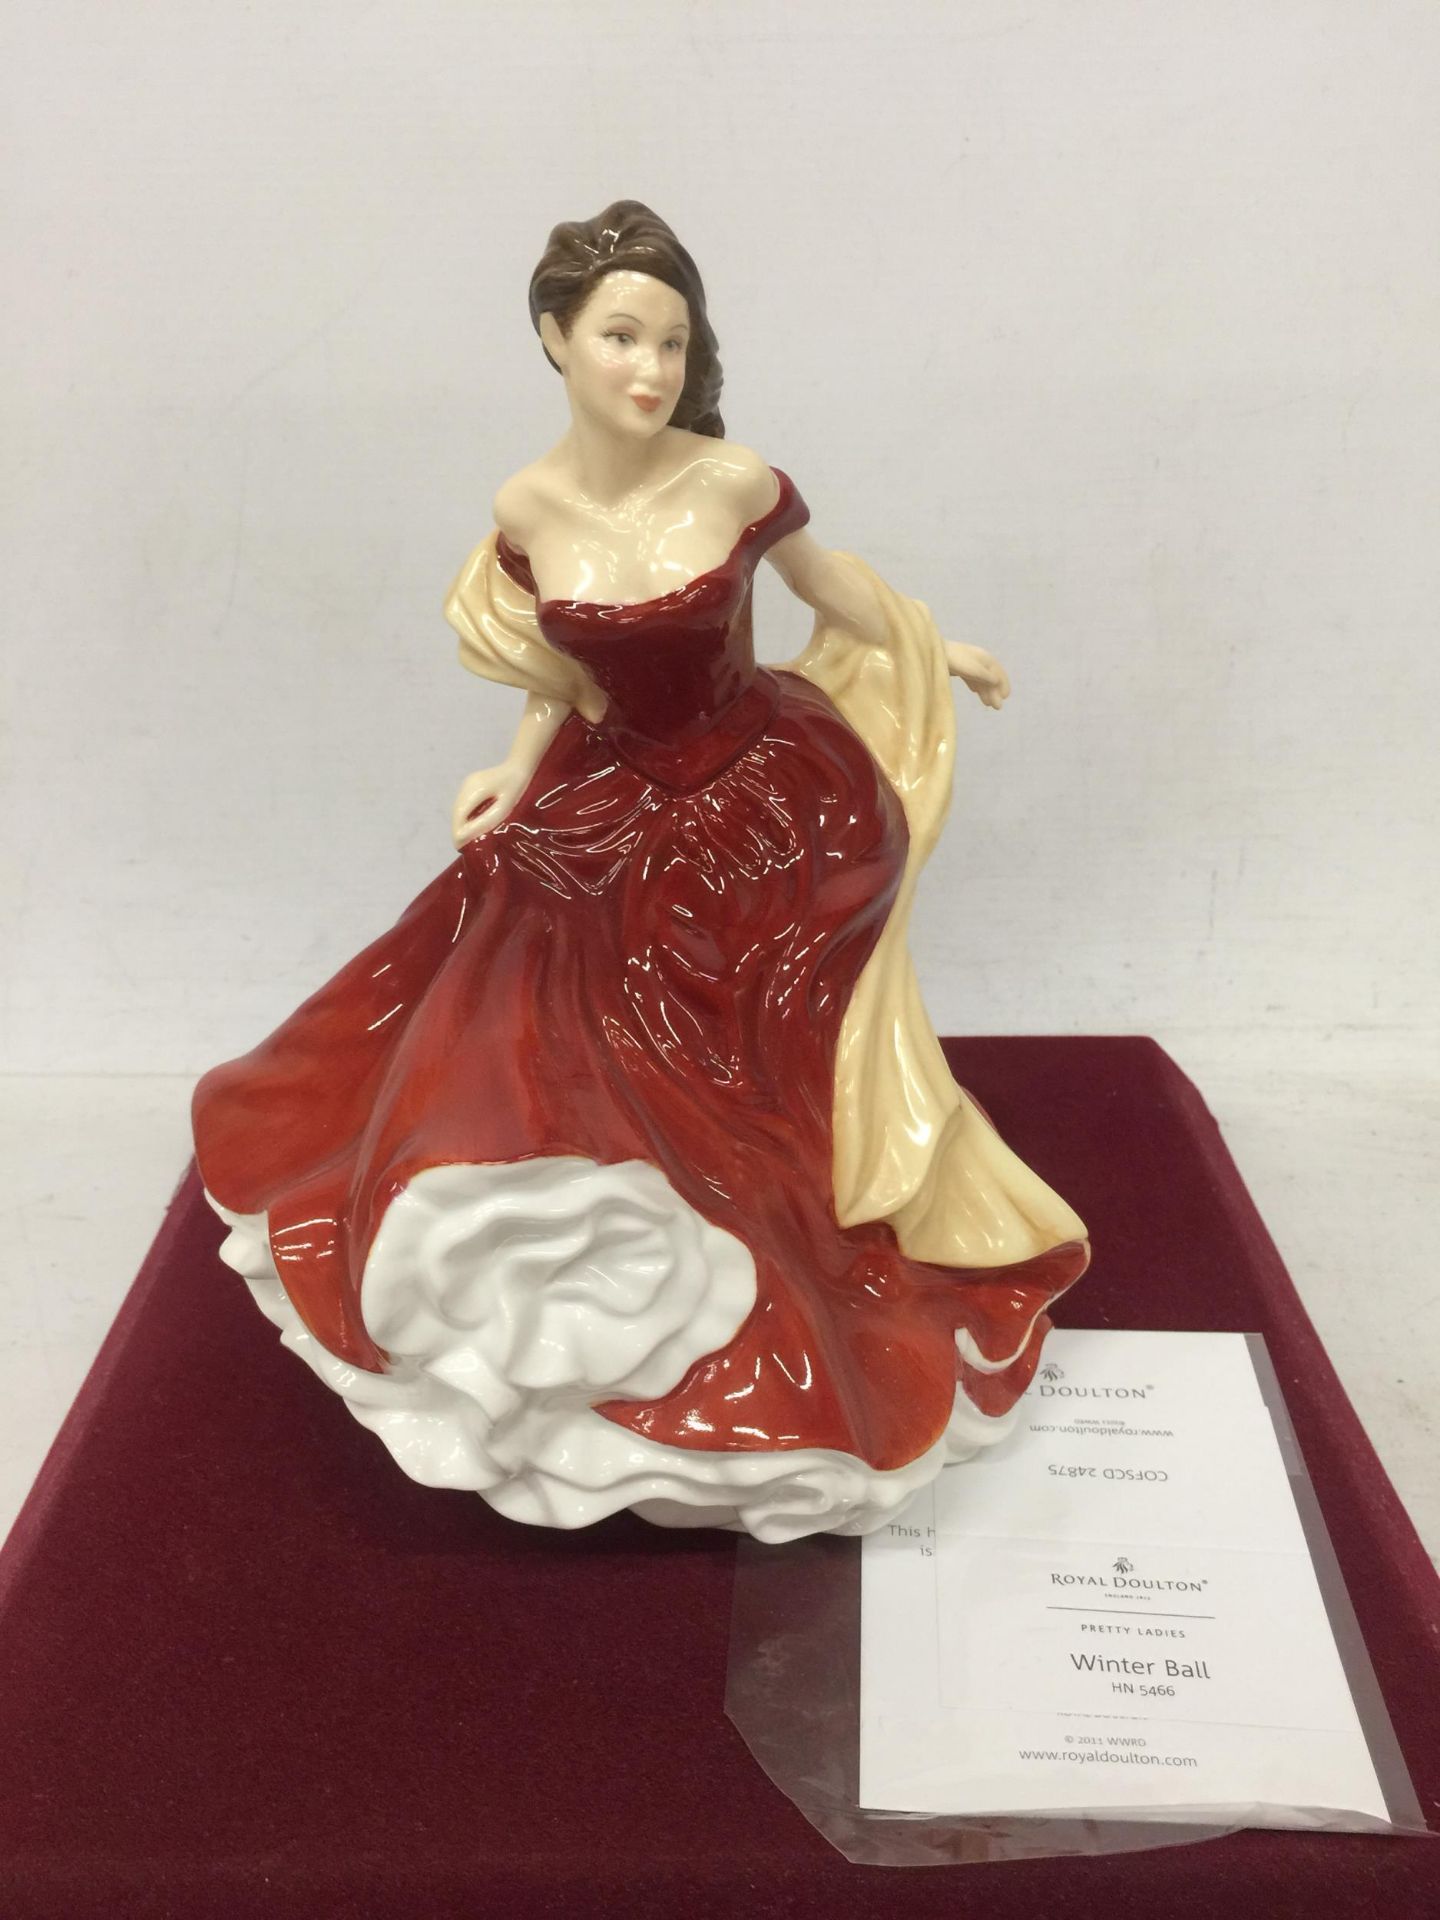 A ROYAL DOULTON PRETTY LADIES WINTER BALL, HN5466 BONE CHINA LADY FIGURE WITH CERTIFICATE